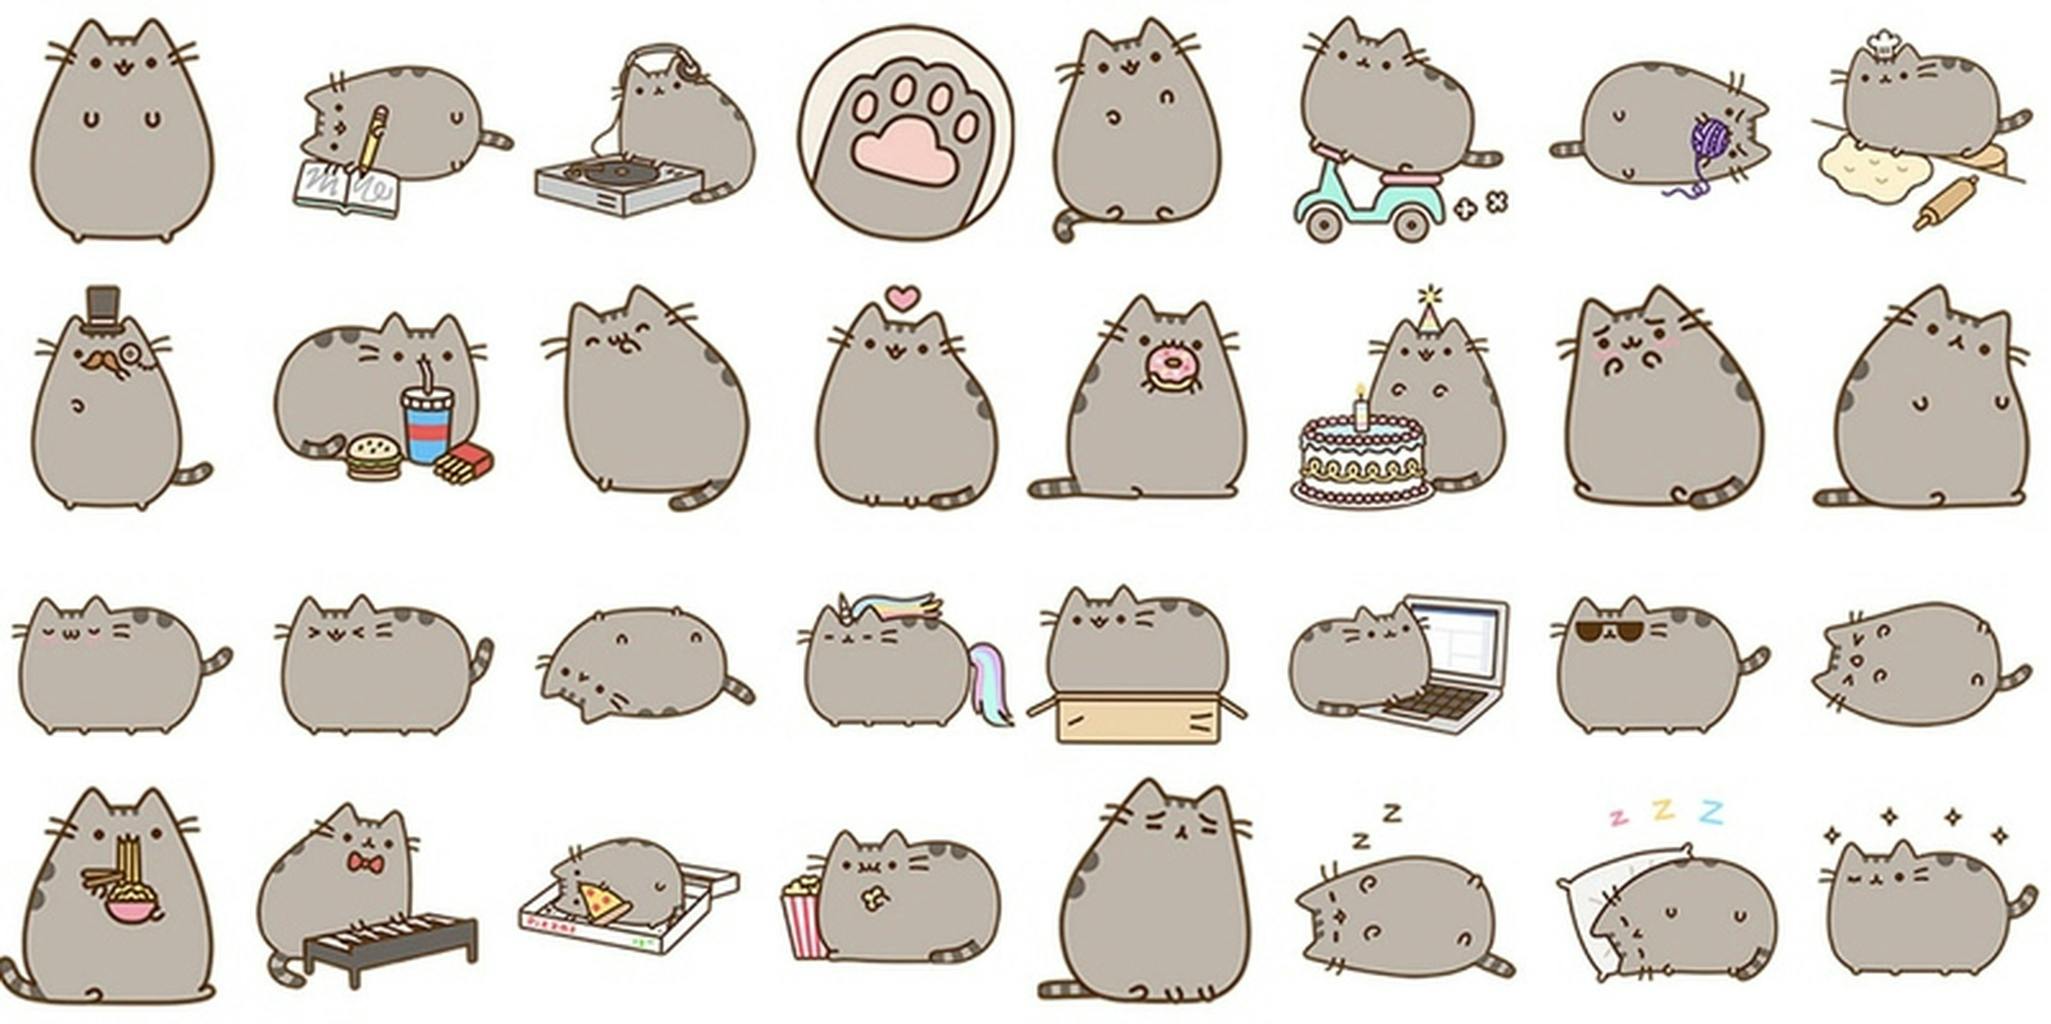 Silla Retirada Pendiente Pusheen-only communication is nigh: Facebook tests stickers in comments